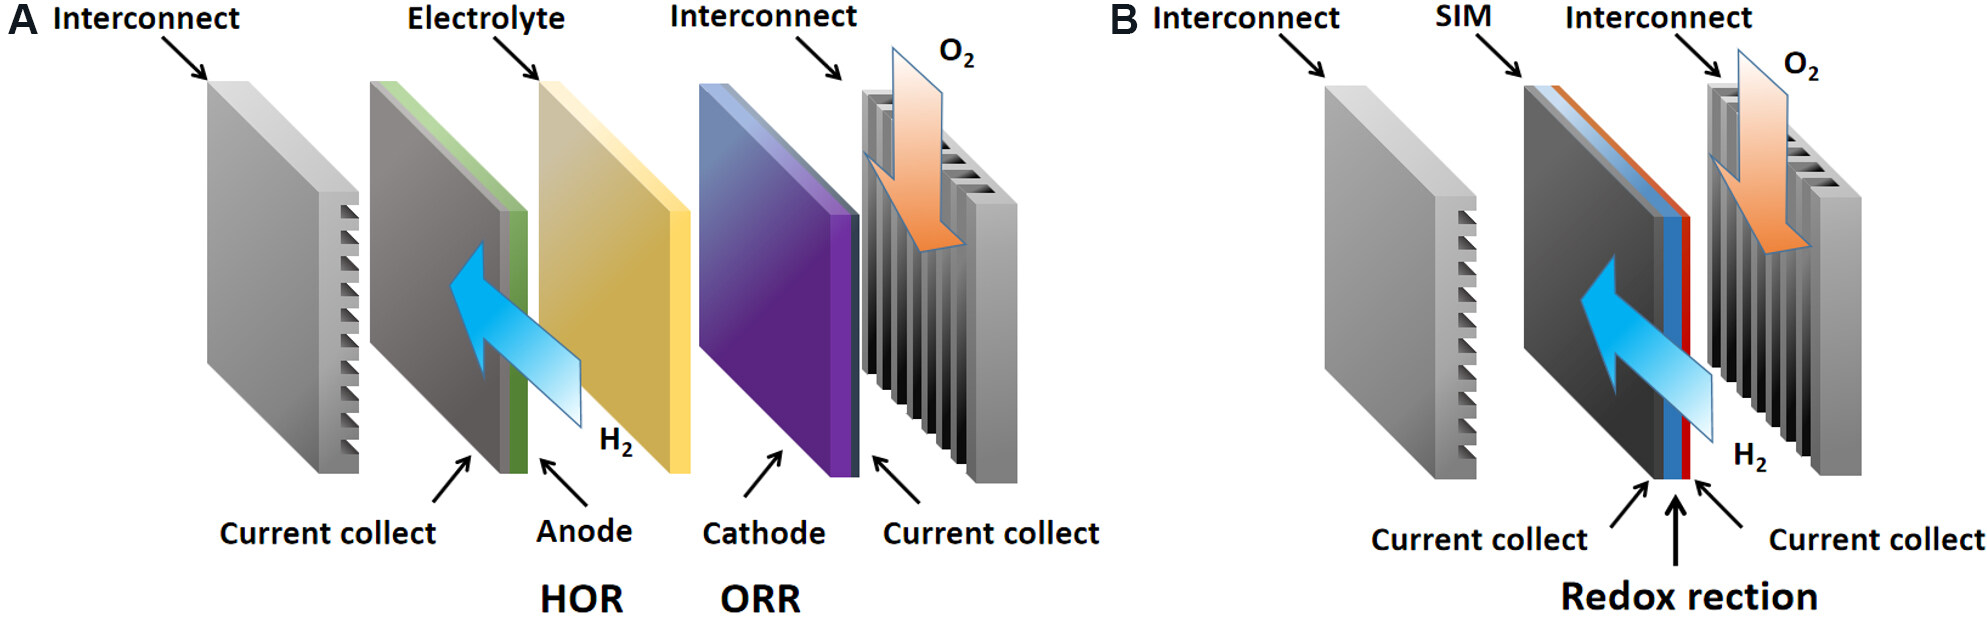 A nanoscale perspective on solid oxide and semiconductor membrane fuel cells: materials and technology